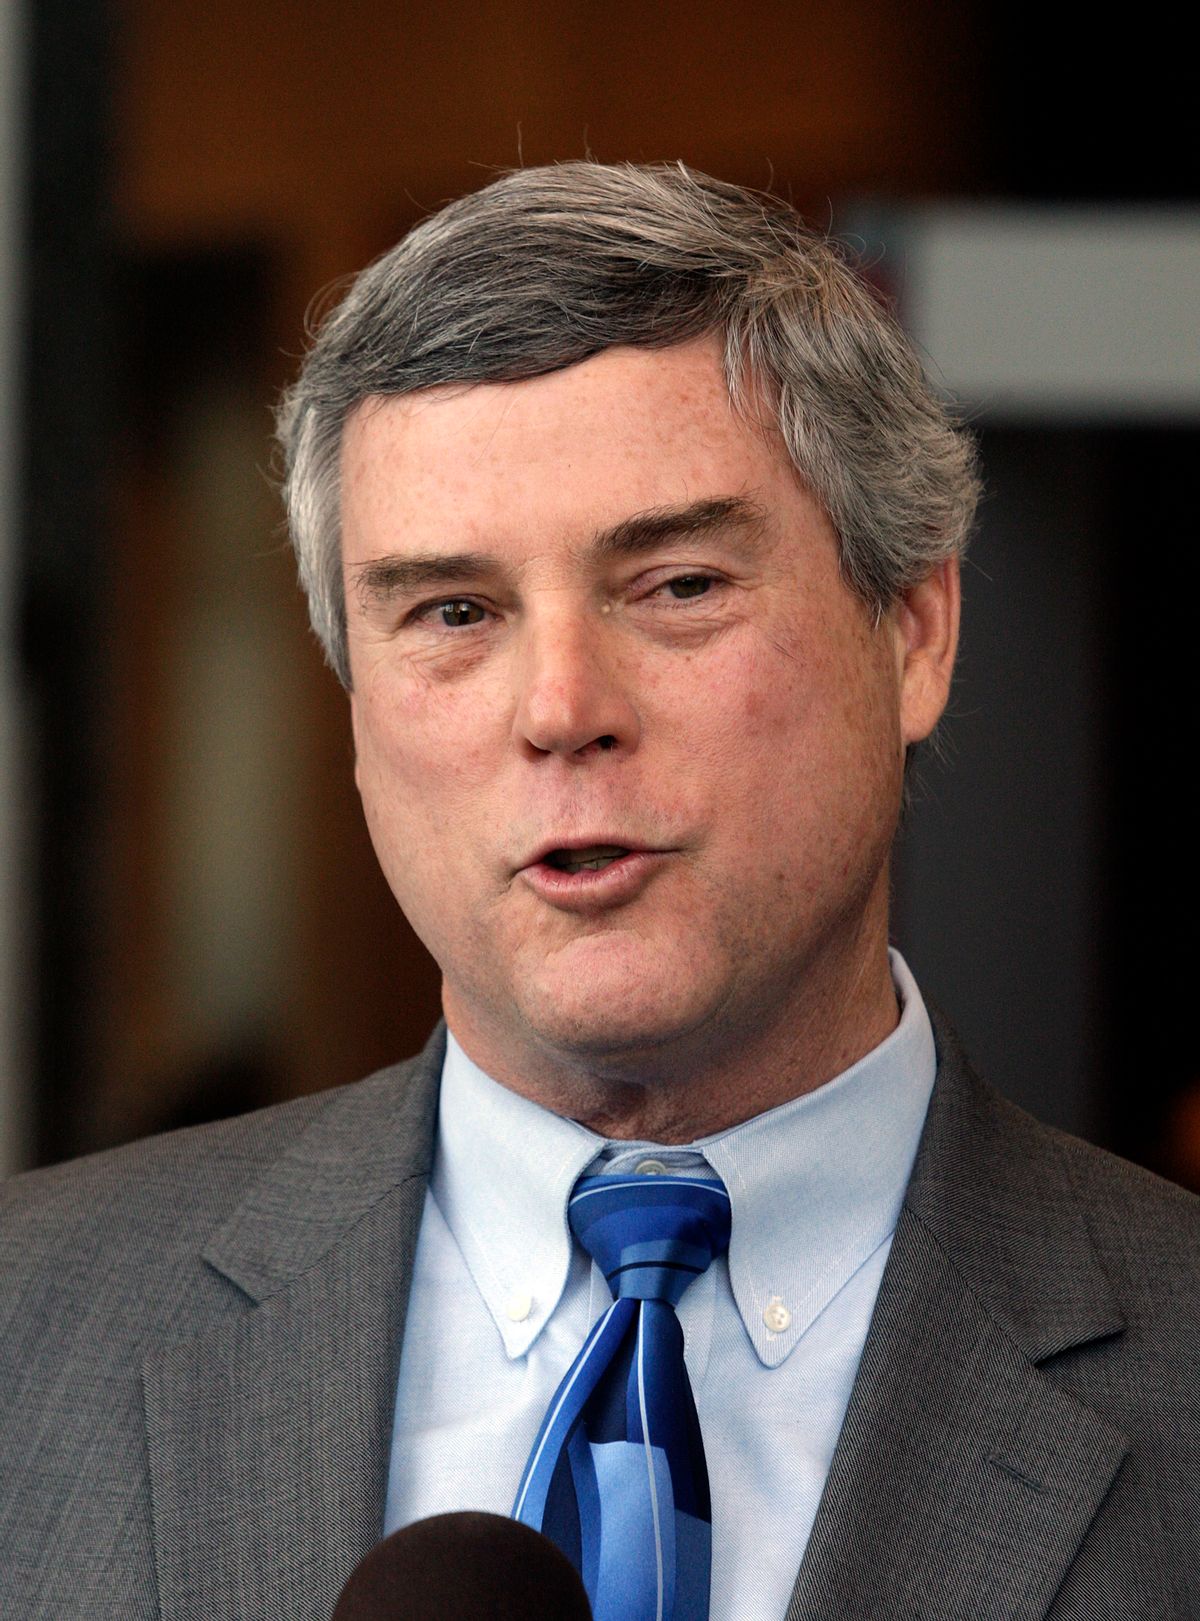 In this Feb. 10, 2011, file photo, St. Louis County Prosecuting Attorney Bob McCulloch speaks in St. Louis. The coming days and weeks will be crucial as grand jurors began hearing evidence that will help determine whether Ferguson police officer Darren Wilson is charged with a state crime for the Aug. 9 shooting of 18-year-old Michael Brown. The states case is being overseen by McCulloch, who is white, and remains in charge despite mounting pressure to step aside from some local residents and black St. Louis area officials who believe he cannot be impartial.   (AP/Tom Gannam)